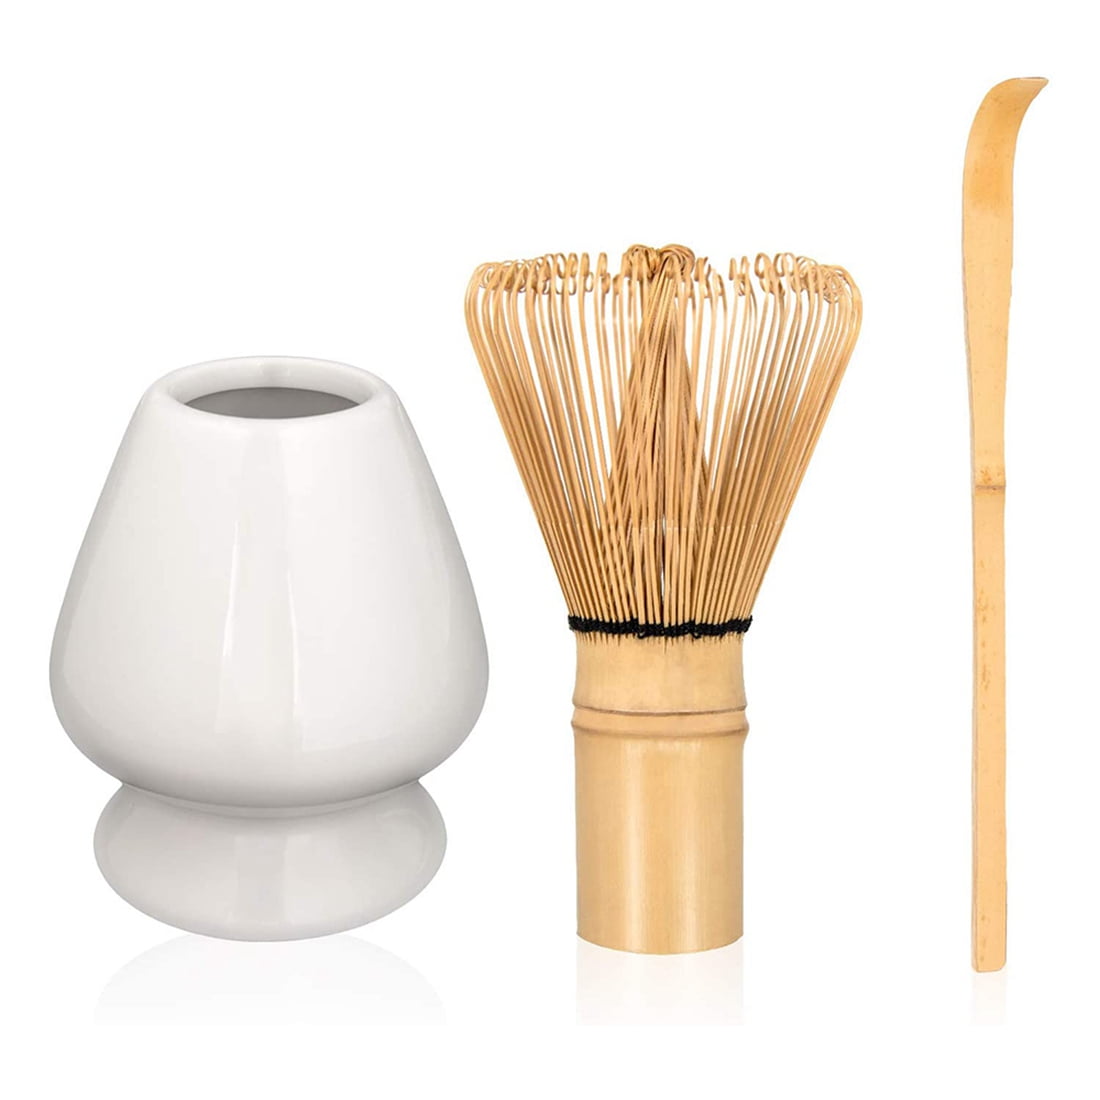 Whisk Stand Matcha Ceremony Starter Kit fit for Traditional Japanese Tea Ceremony Matcha Bowl+Matcha Bamboo Whisk Tool White 